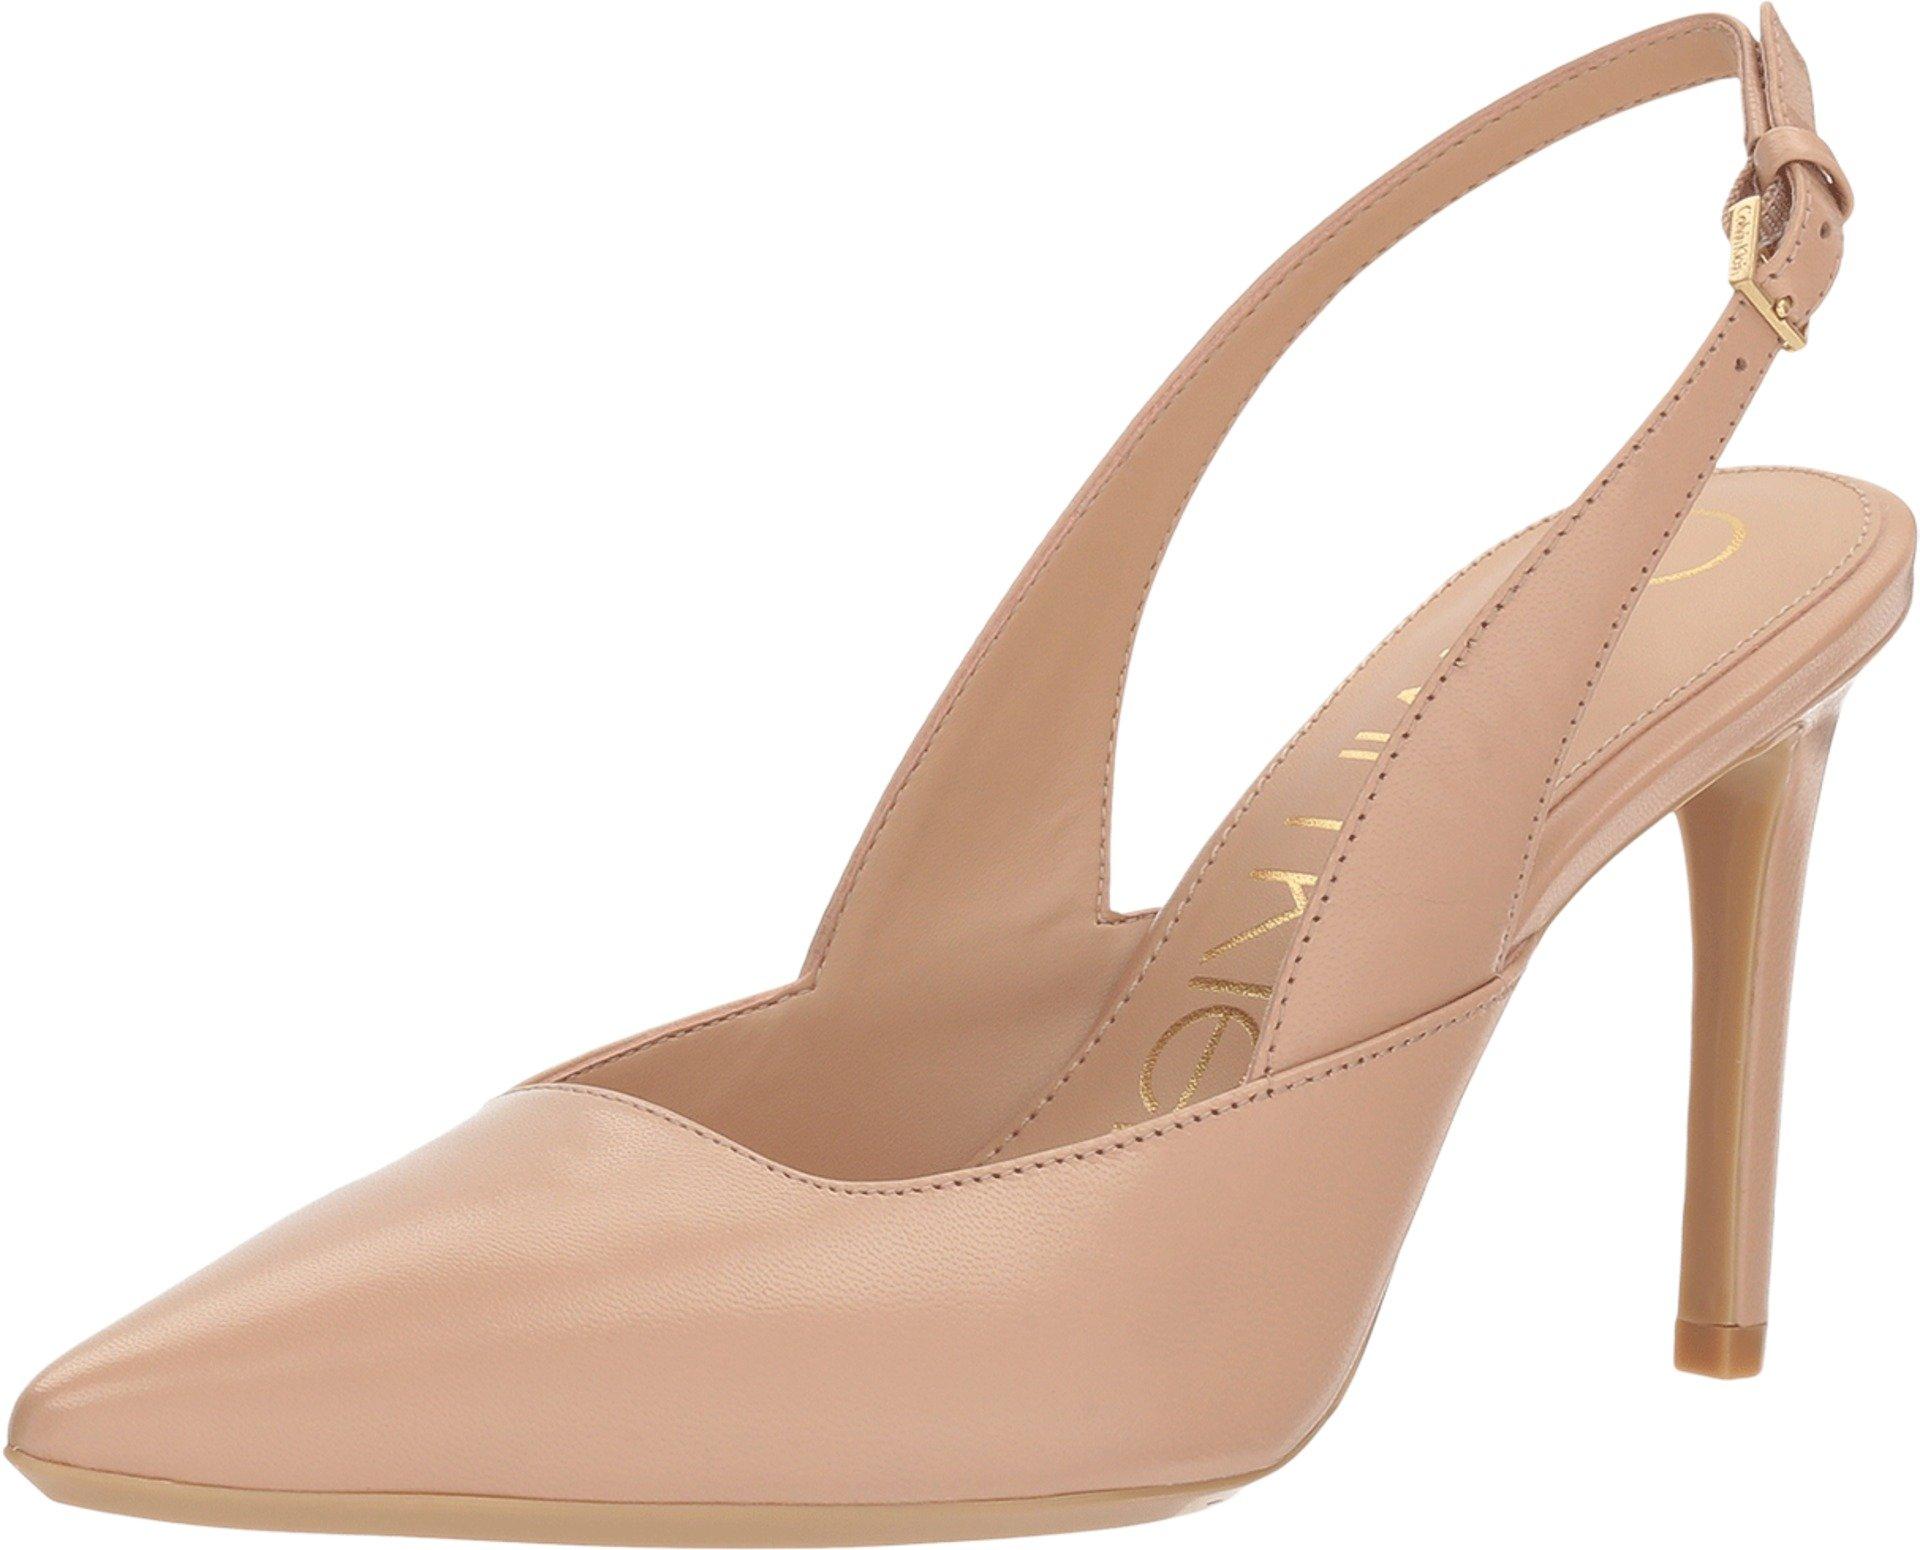 Calvin Klein Desert Sand Rielle Leather Slingback Pumps in Natural | Lyst